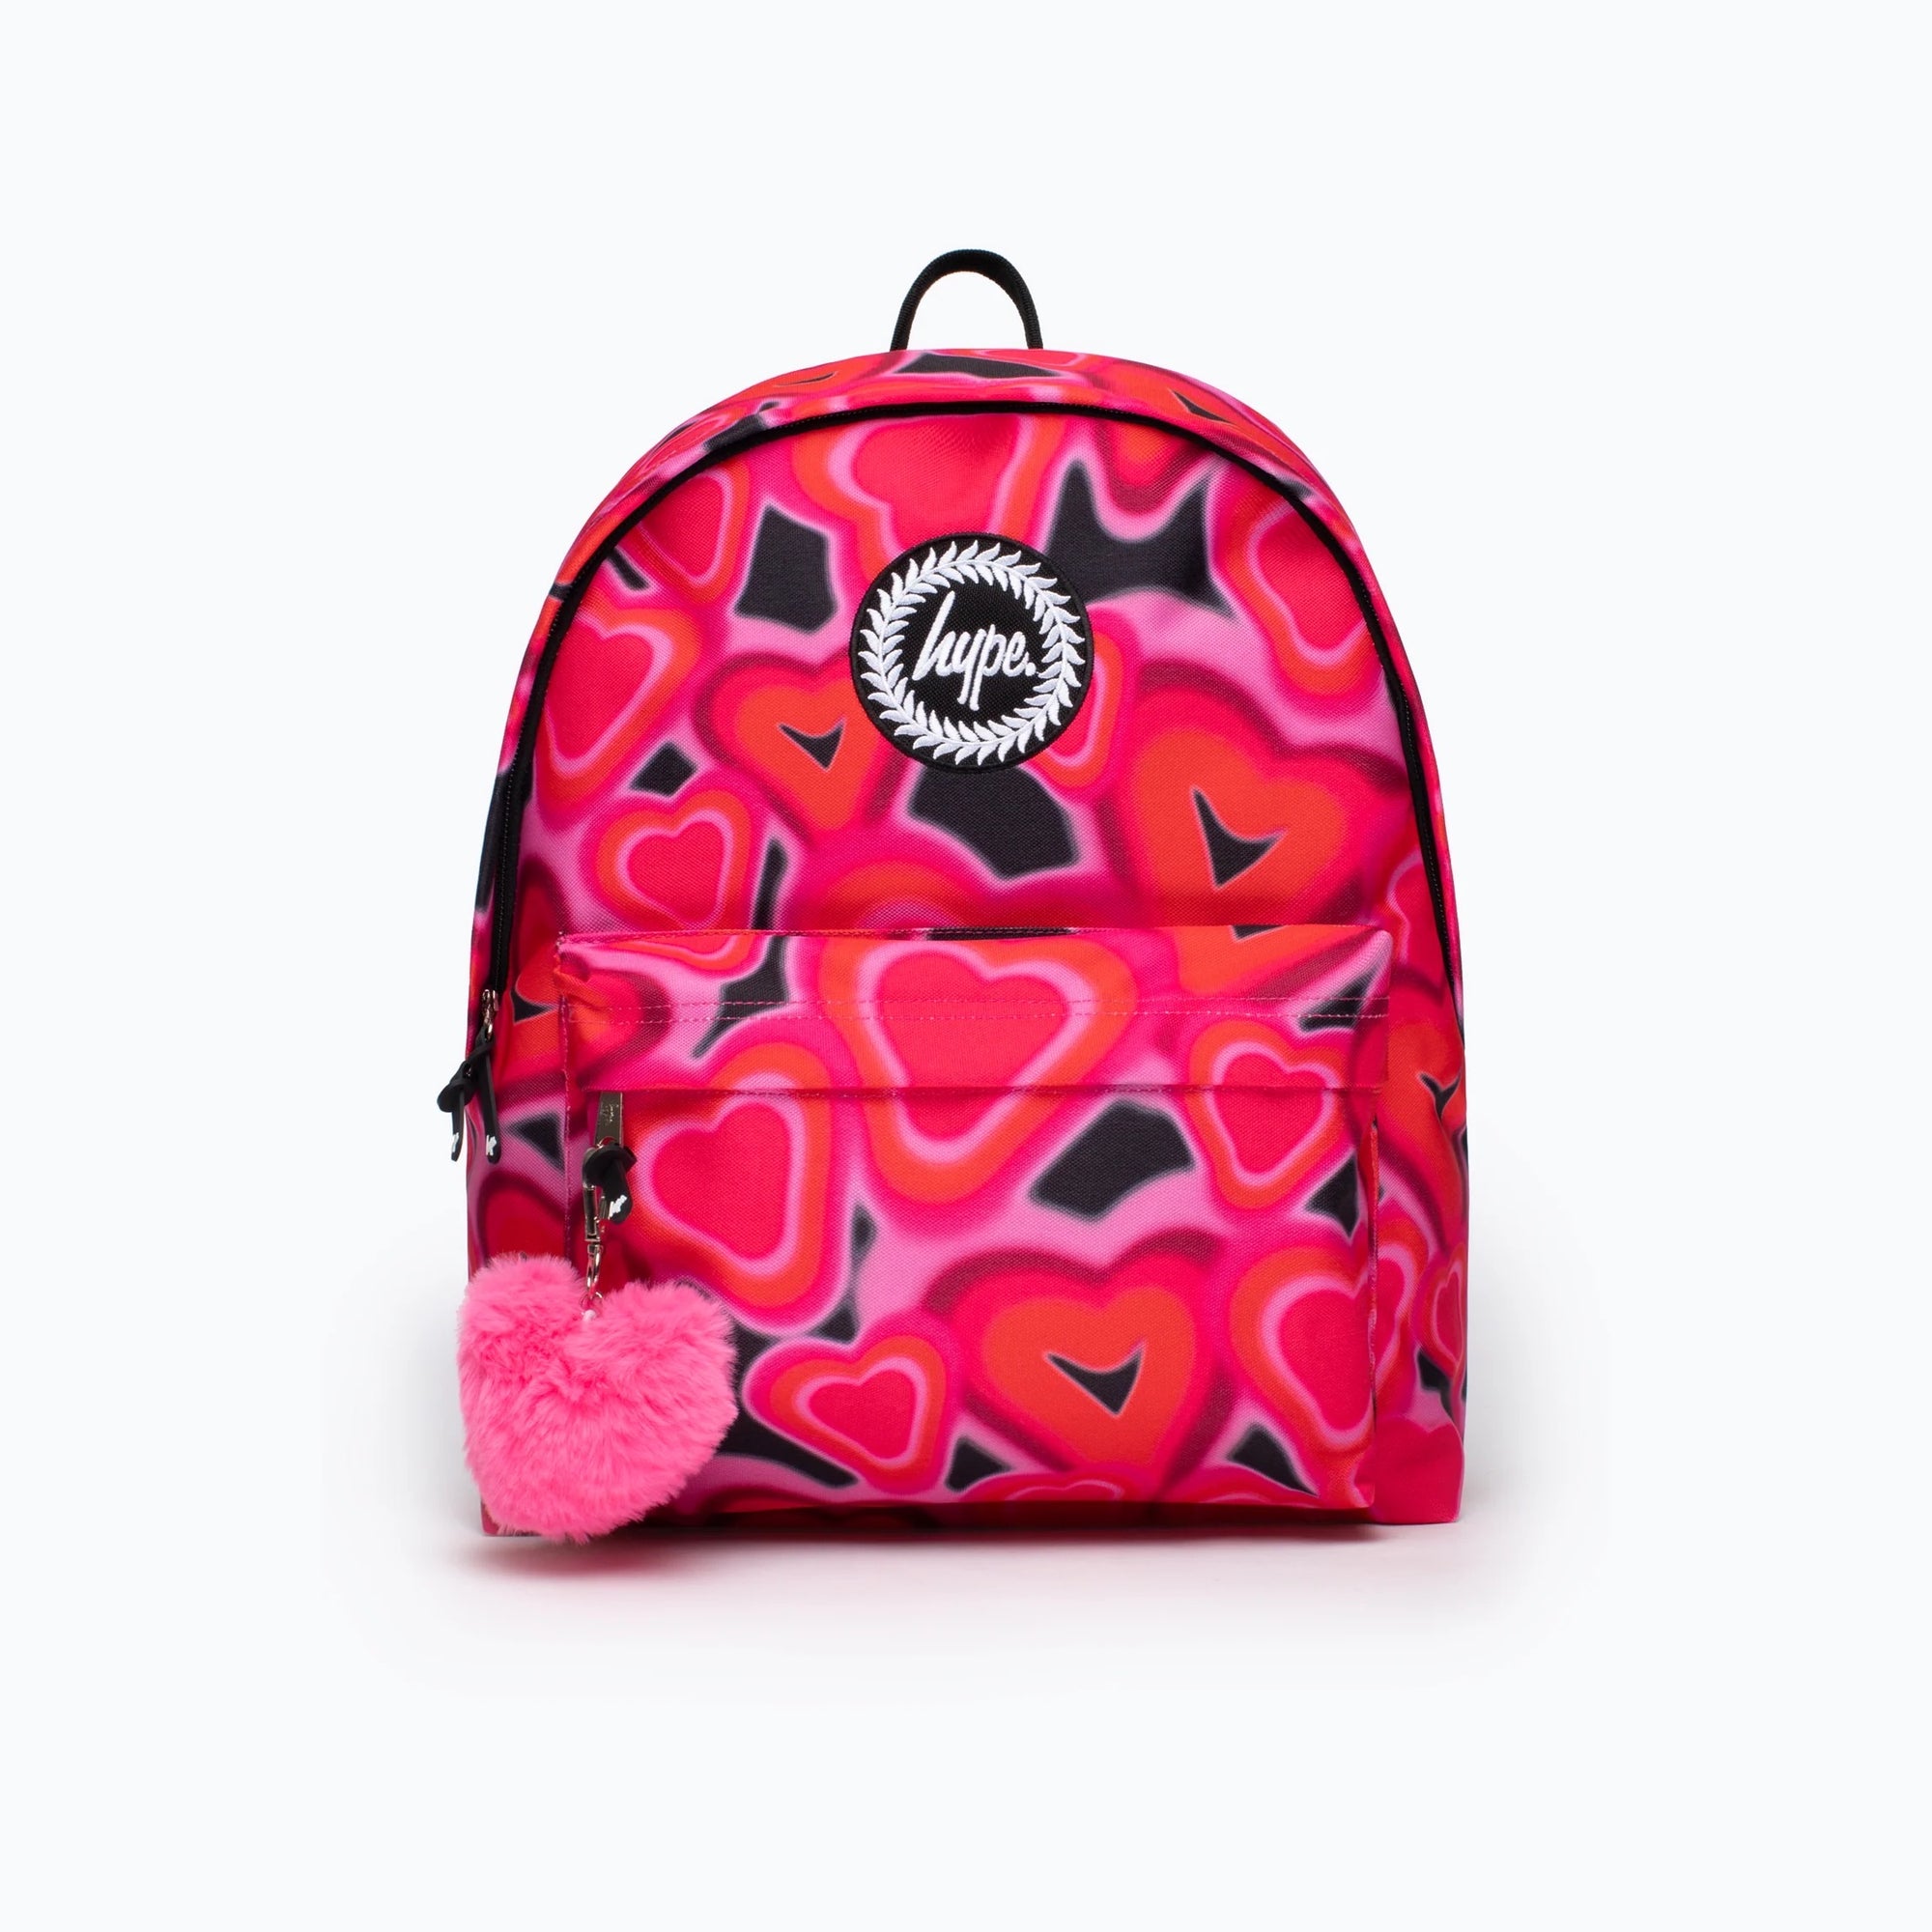 Hype Spray Hearts Backpack Yucb084 Accessories ONE SIZE / Pink